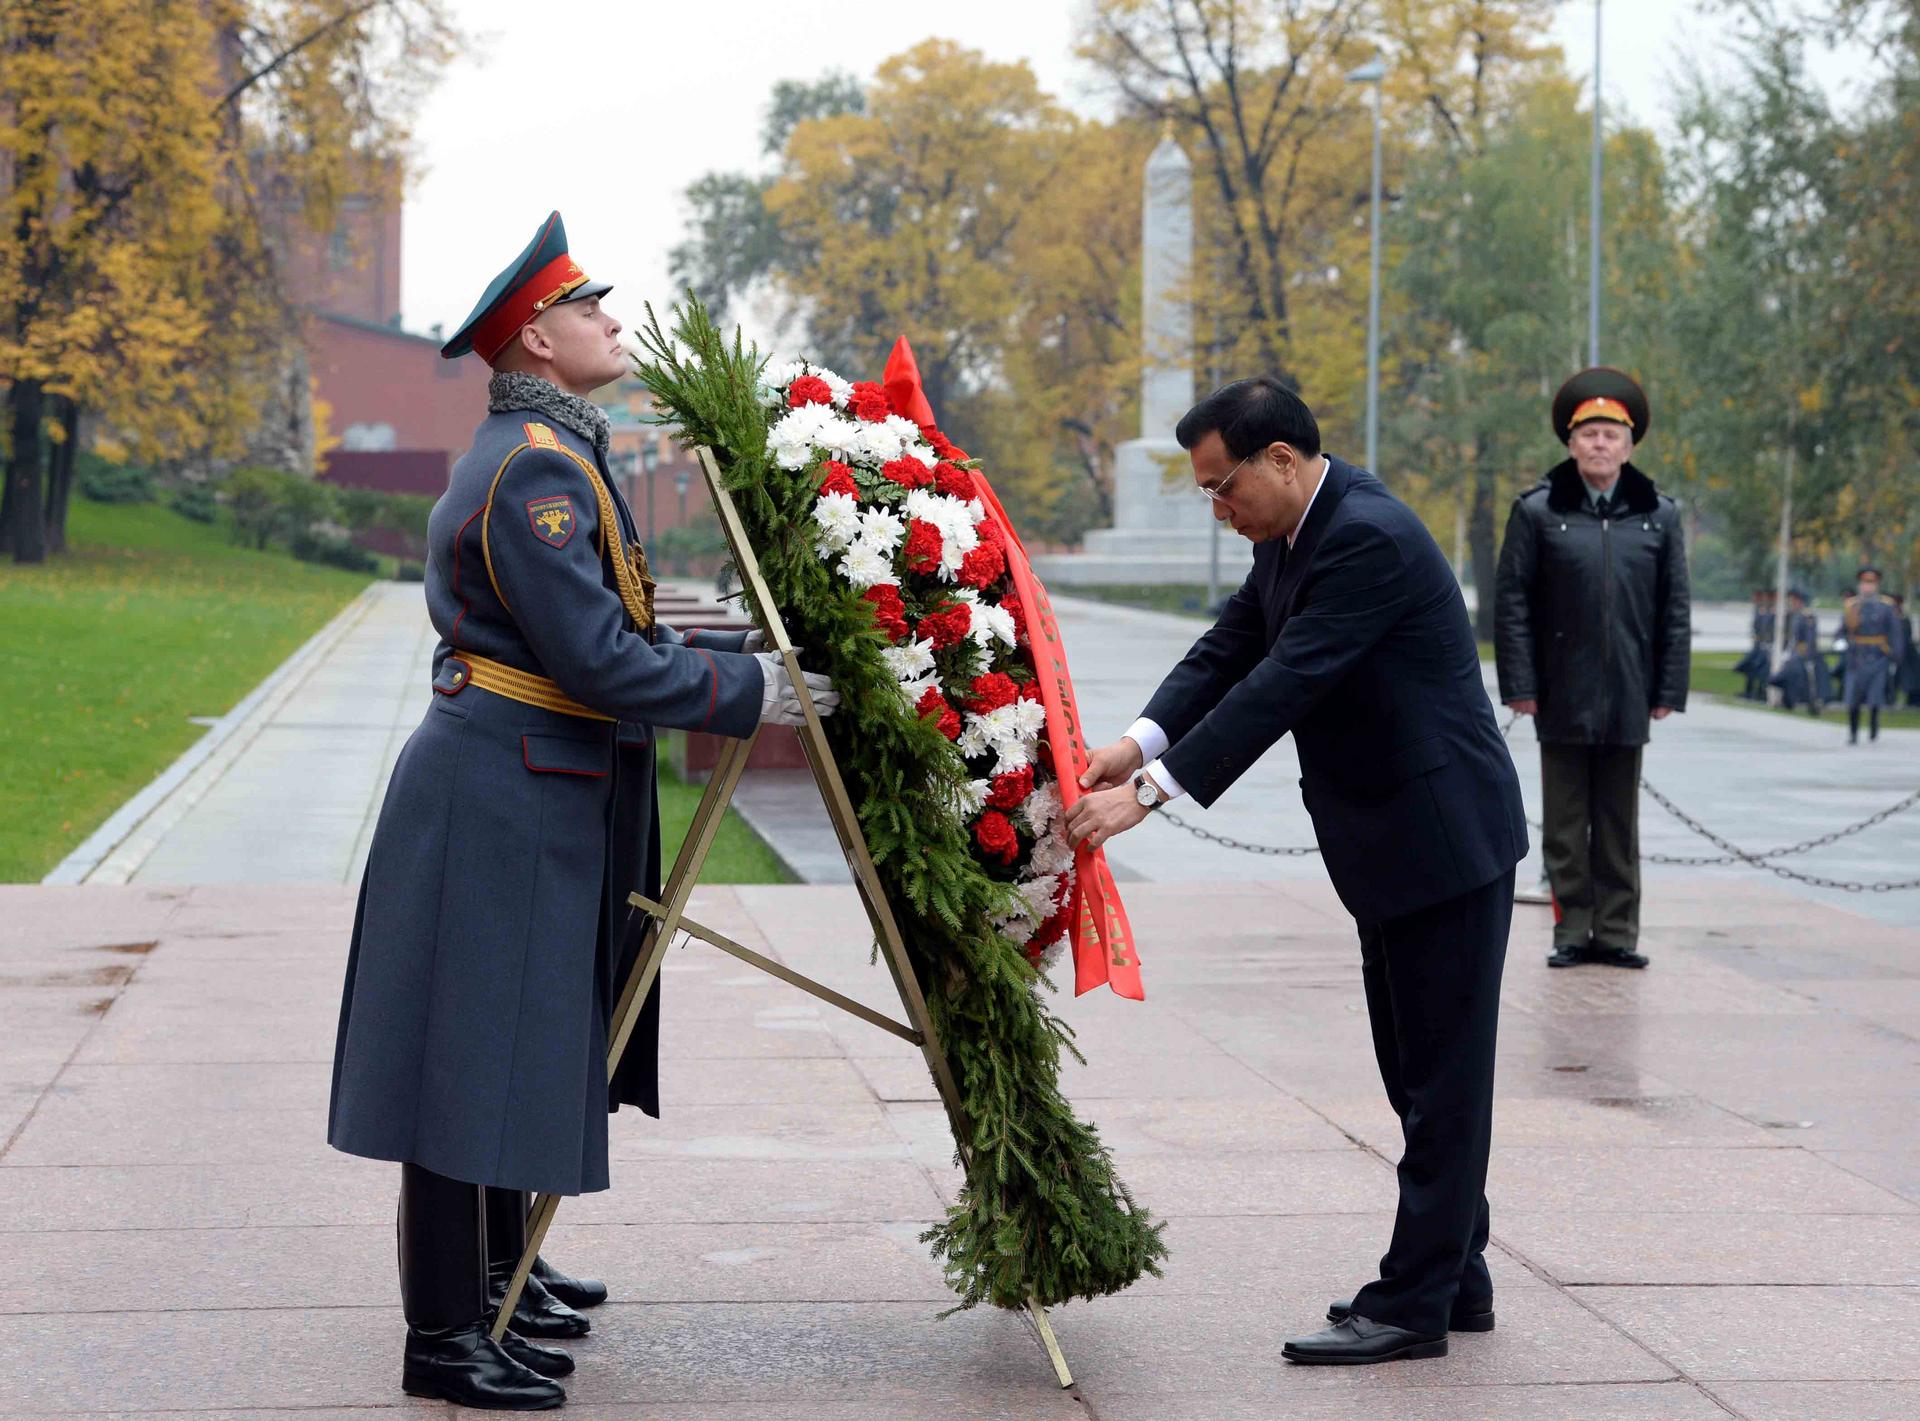 Premier Li Keqiang lays a wreath yesterday at Moscow's Tomb of the Unknown Soldier as part of his trip to Russia. Photo: Xinhua